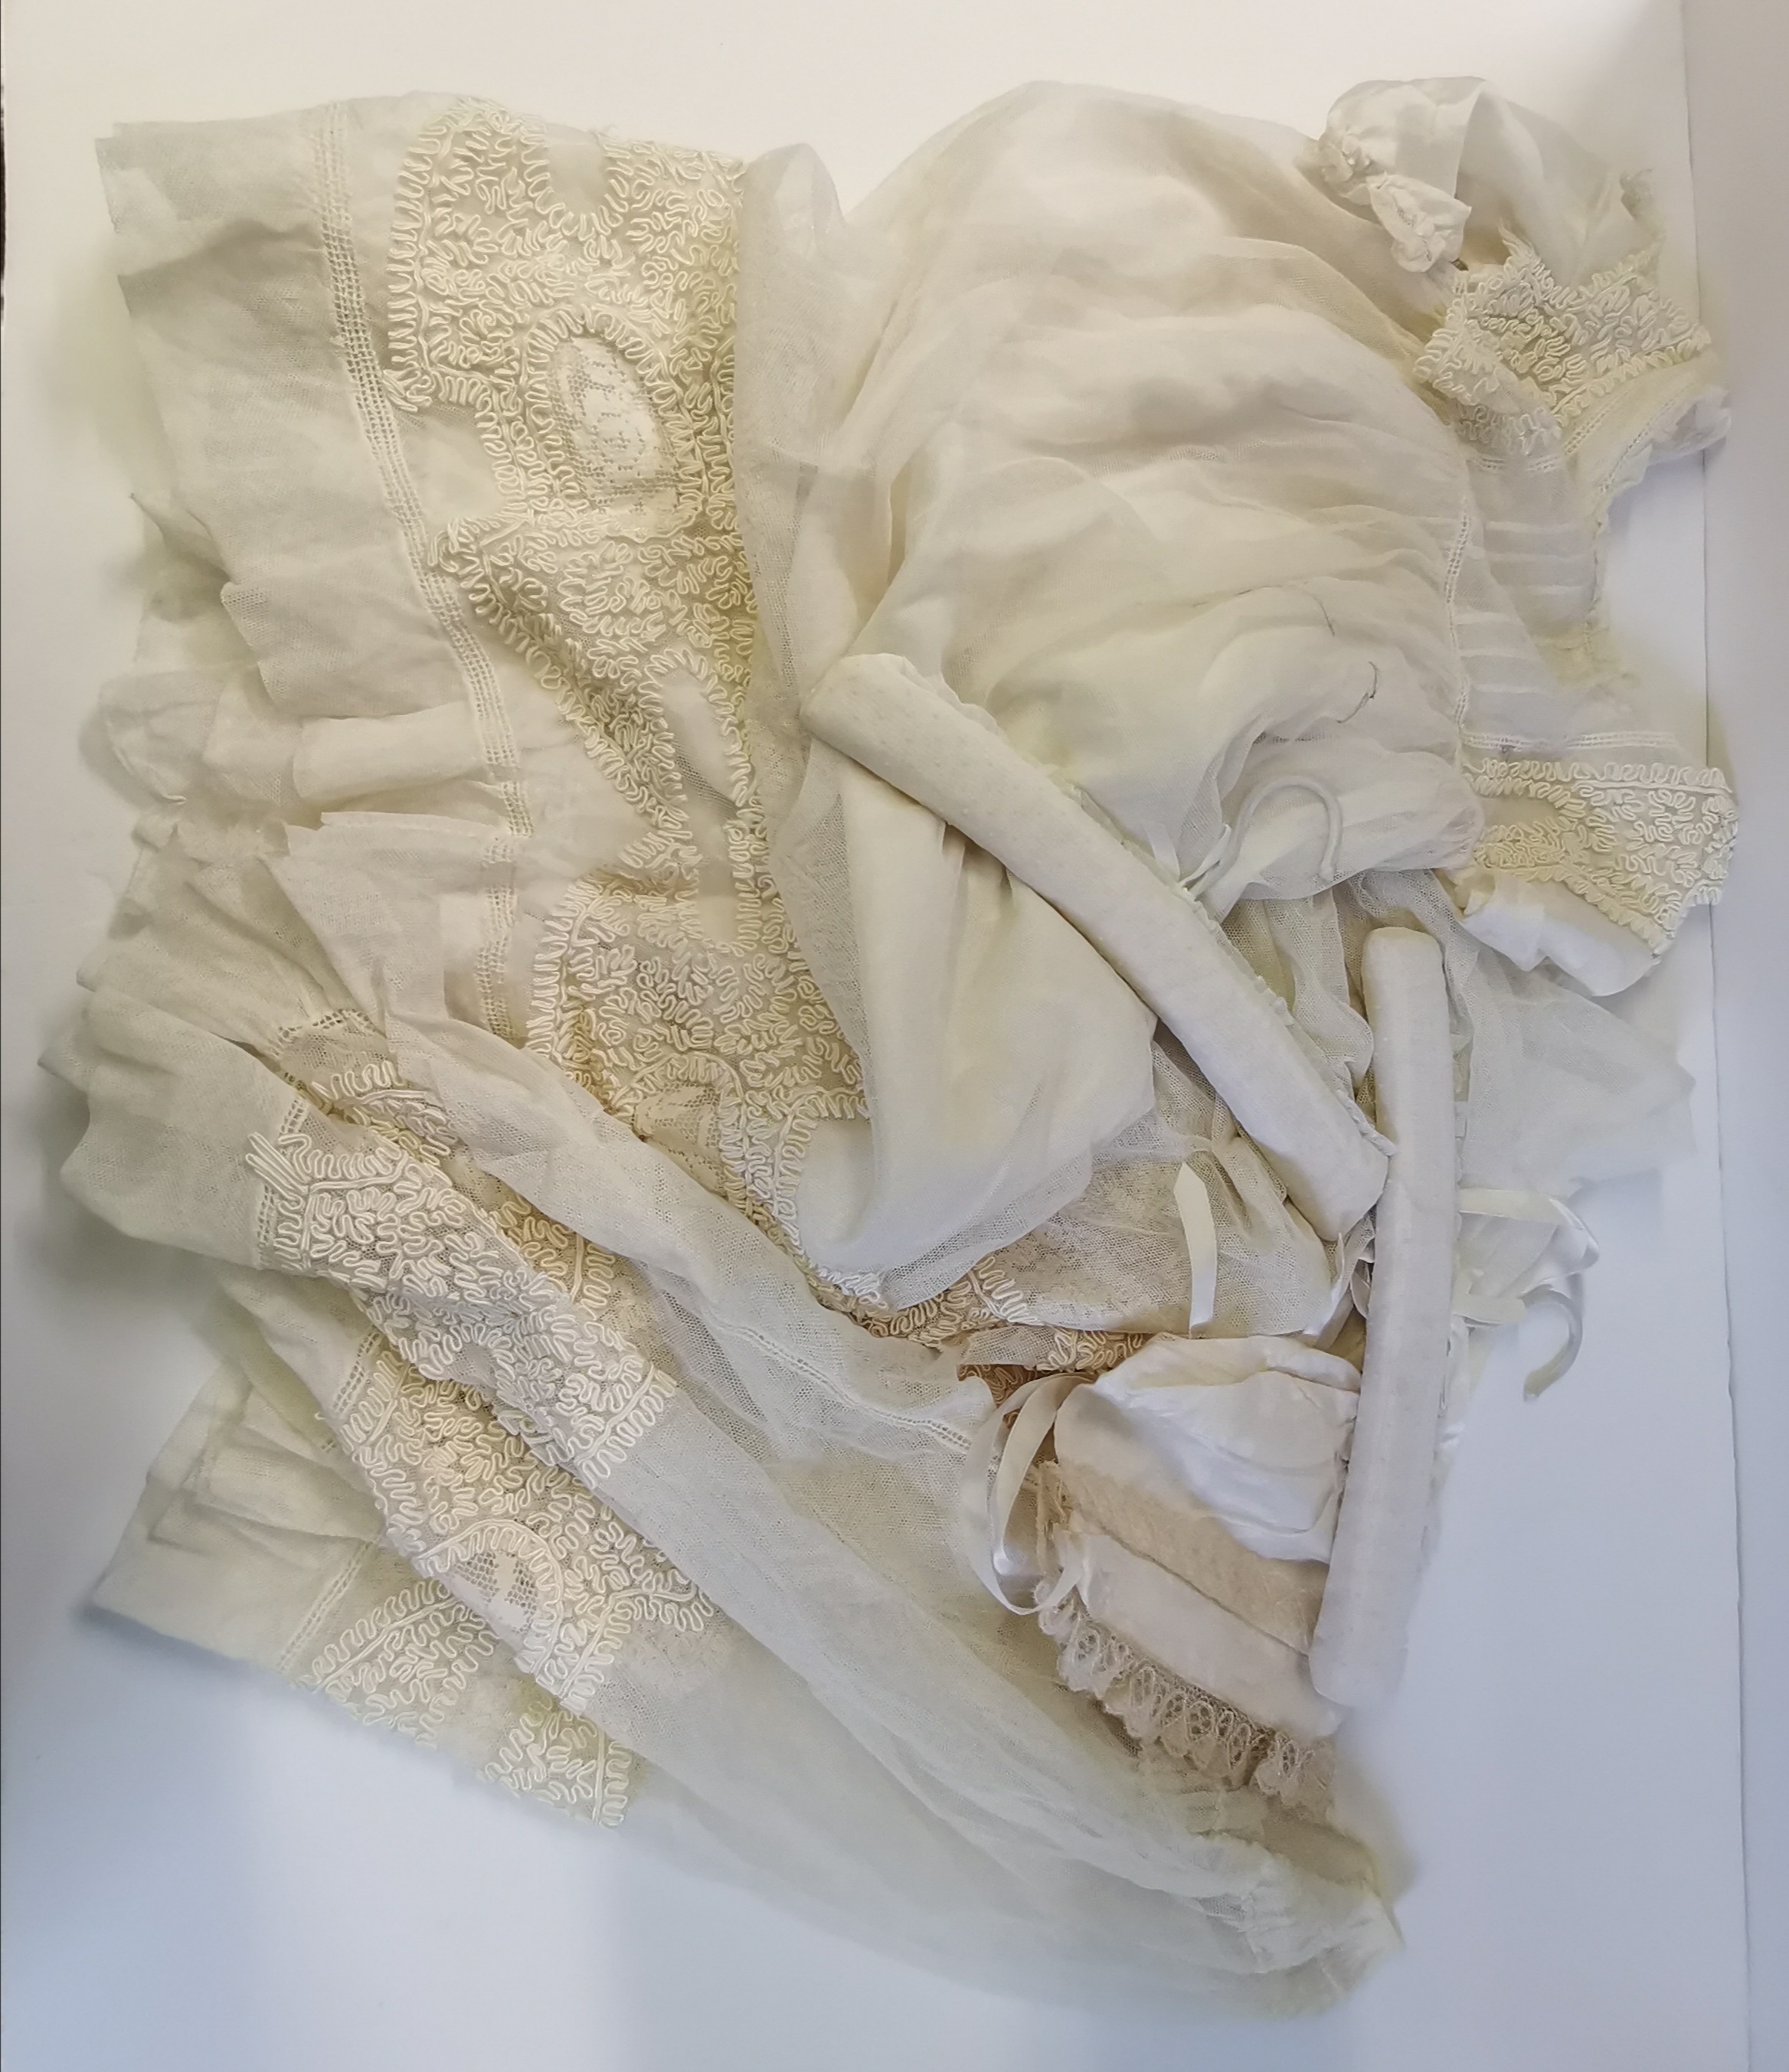 Antique silk and lace items - wedding veil, Christening robe etc - Image 3 of 8